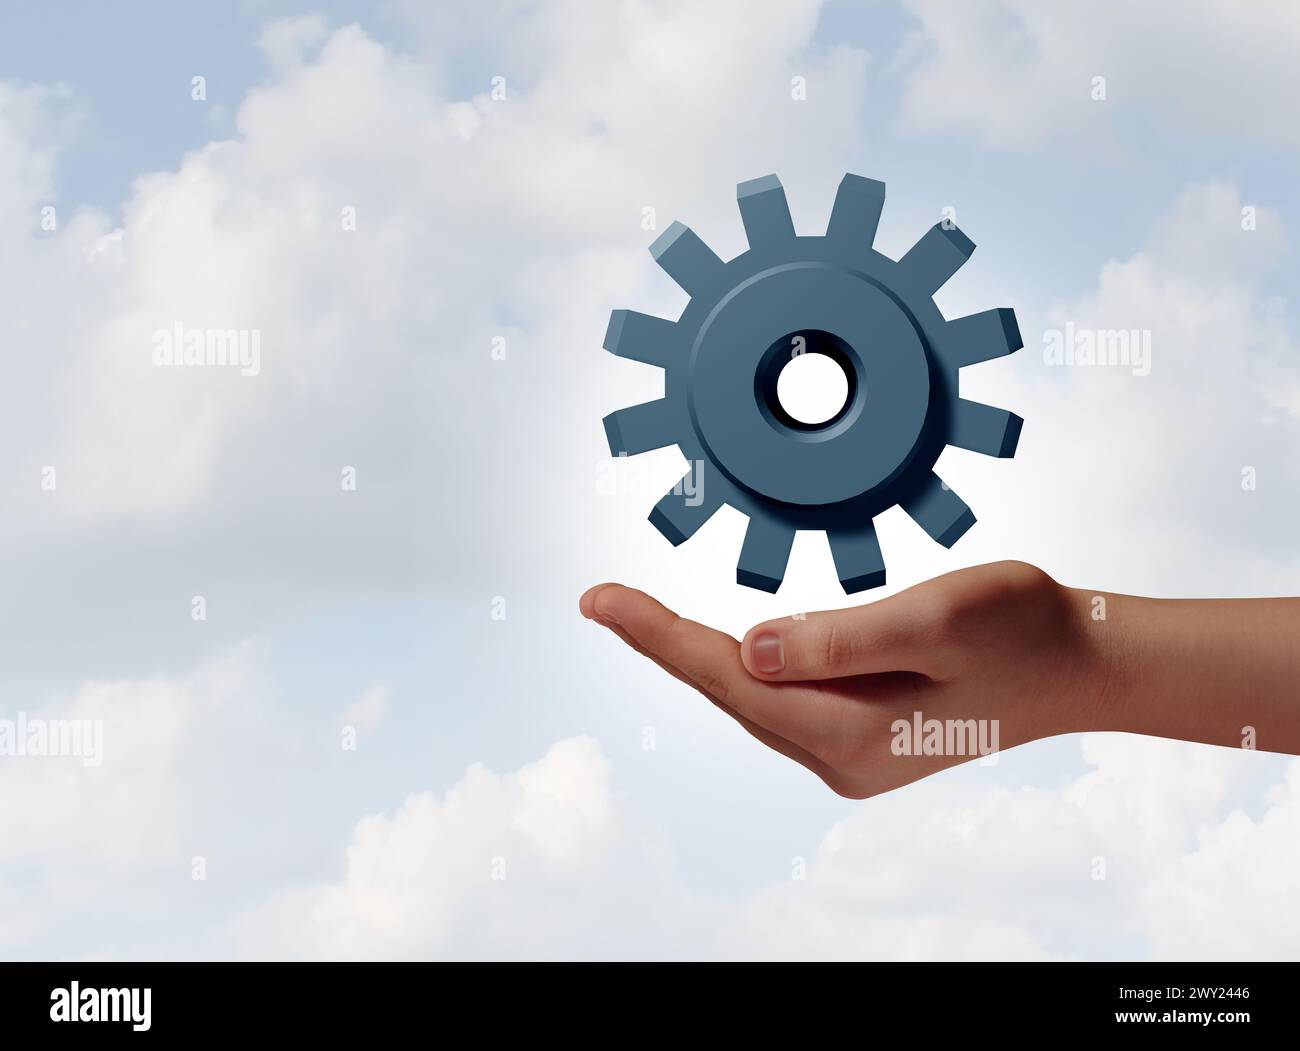 Business Workflow And Automation as a hand holding a cog representing a manager or management optimization concept as a problem solver and troubleshoo Stock Photo